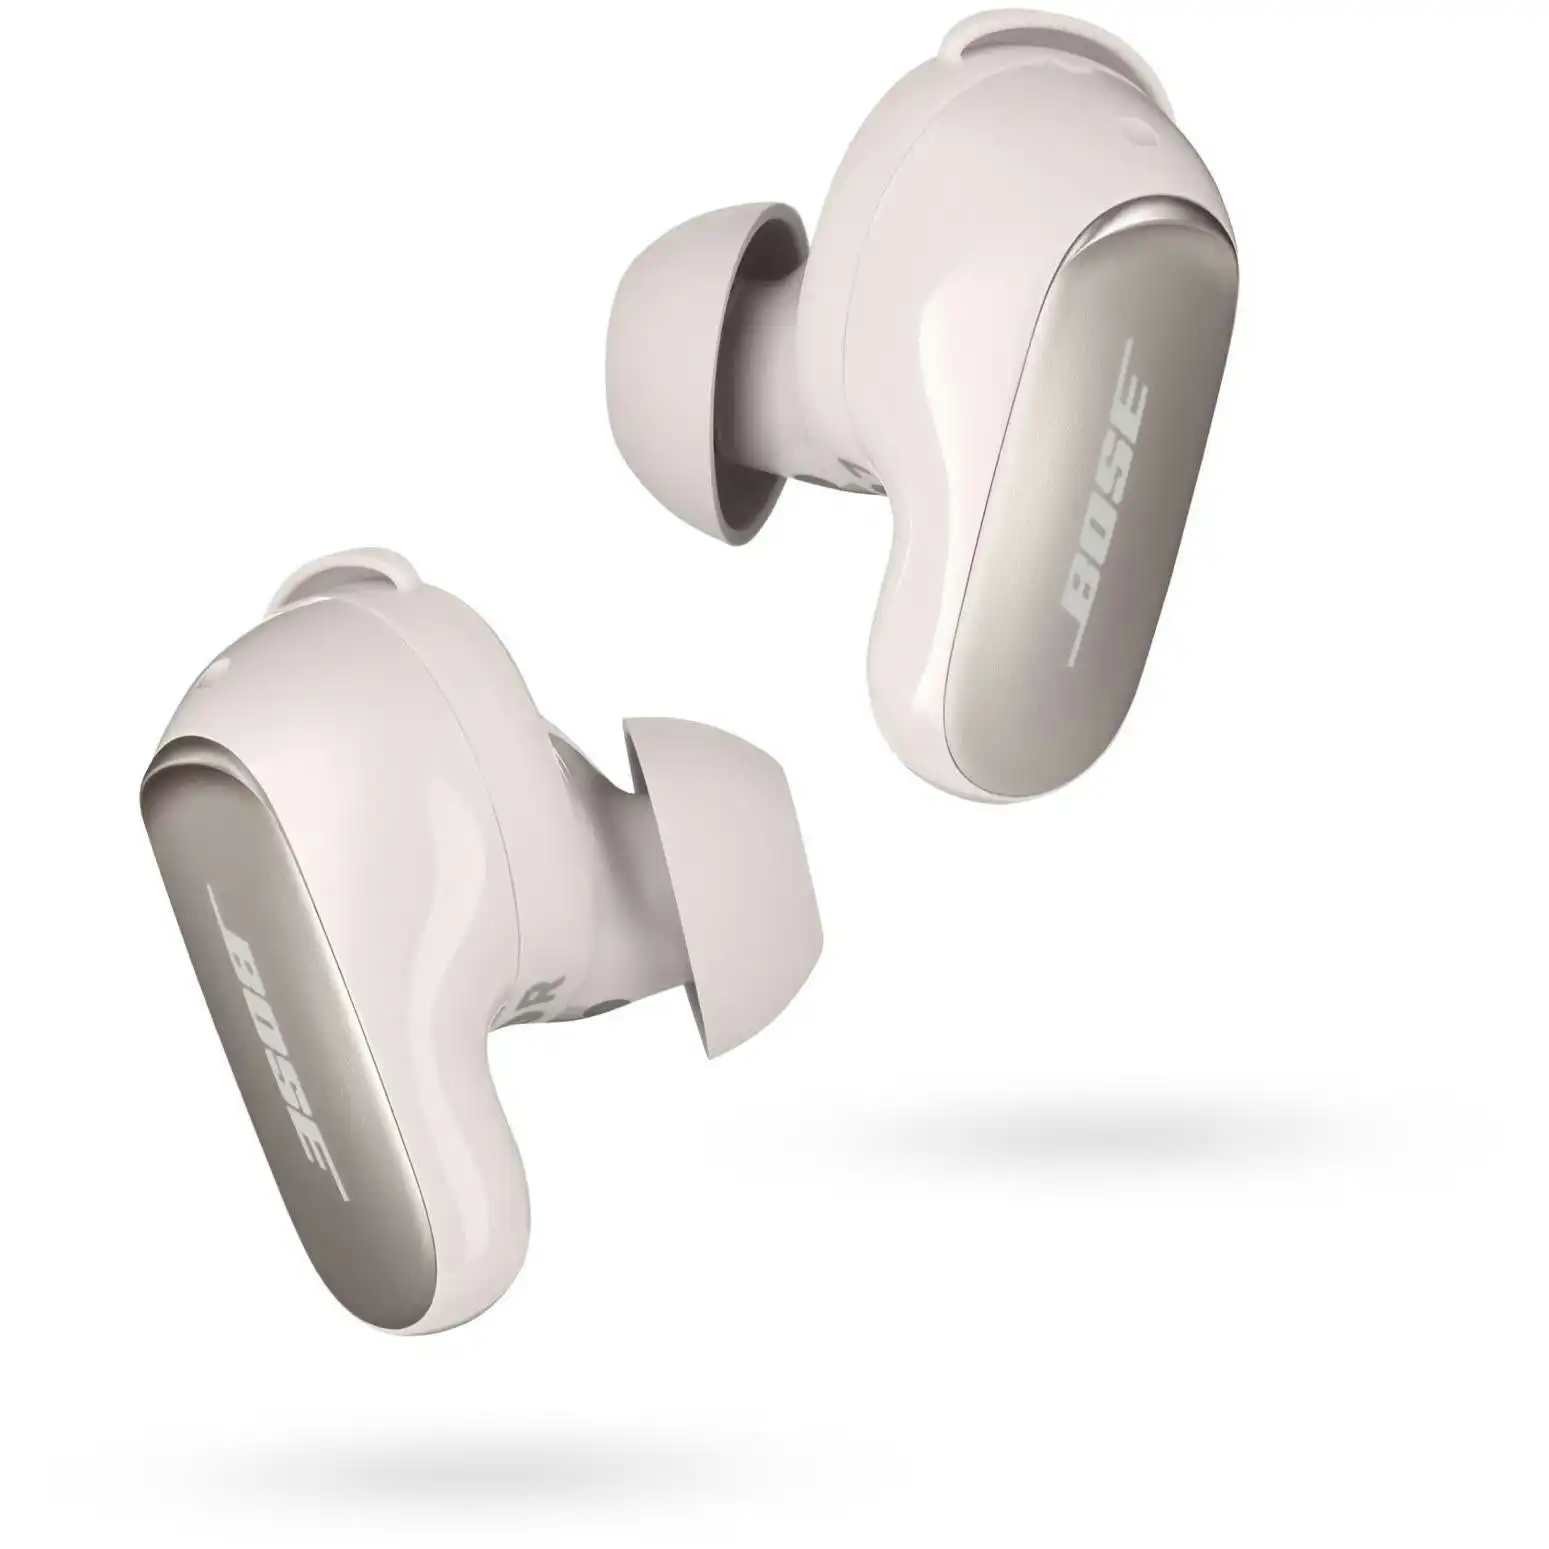 Bose QuietComfort Ultra Wireless Noise Cancelling Earbuds - White Smoke